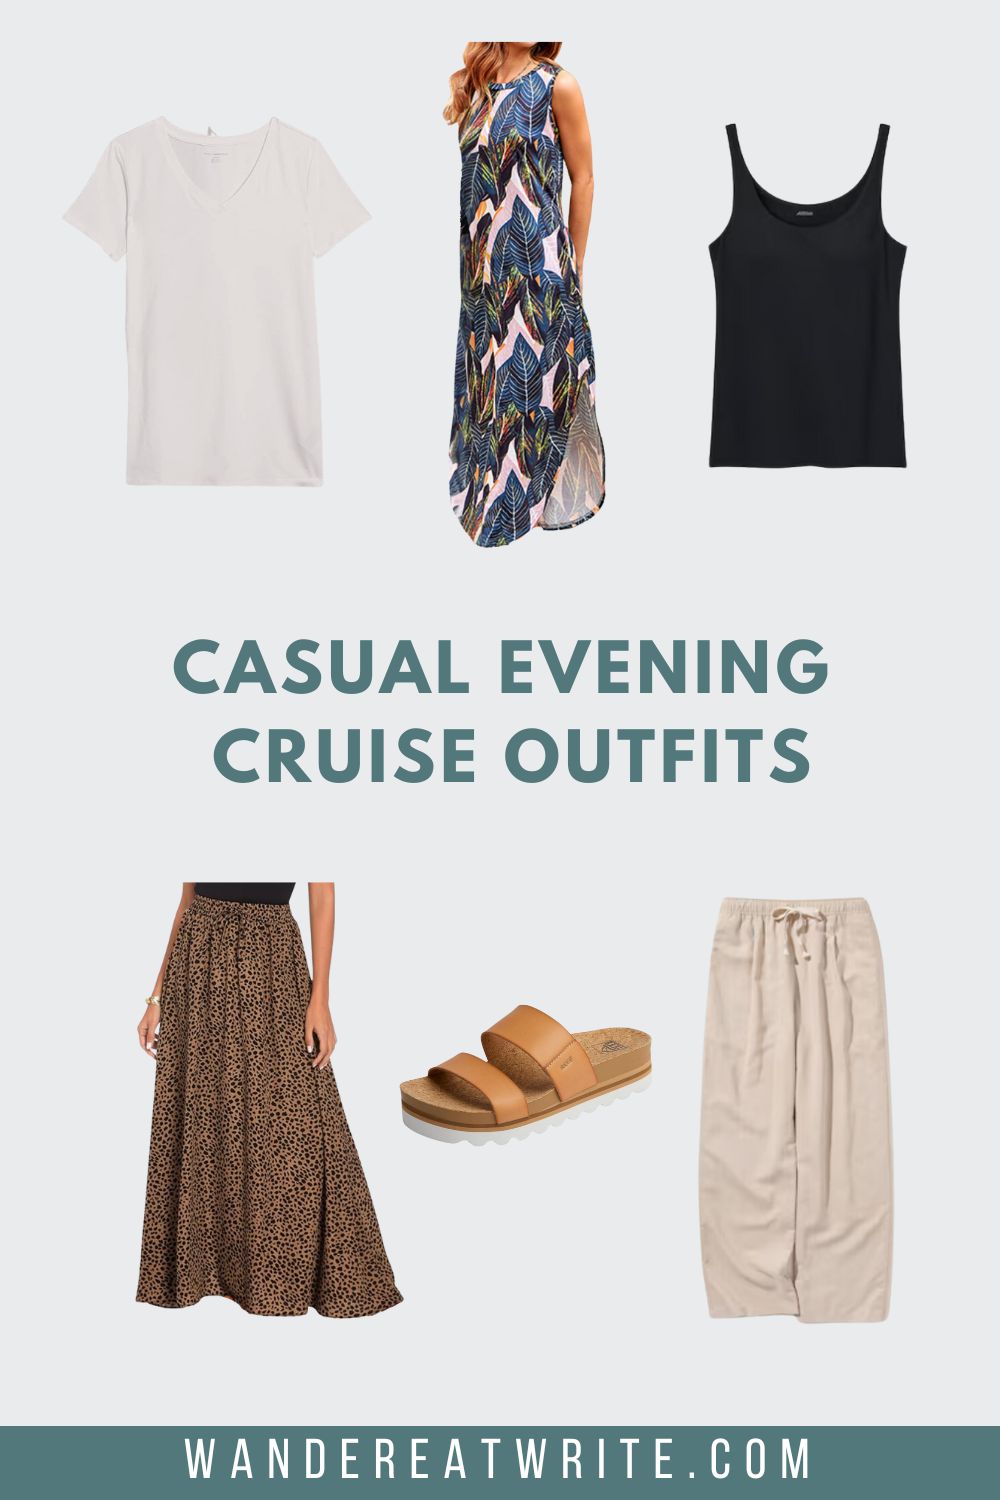 Women's casual evening cruise outfit ideas. Photos clockwise from top left: a white v-neck tee, a sleeveless maxi summer dress with blue feather patterns, black tank top, beige linen pants, tan sandals, leopard print maxi skirt